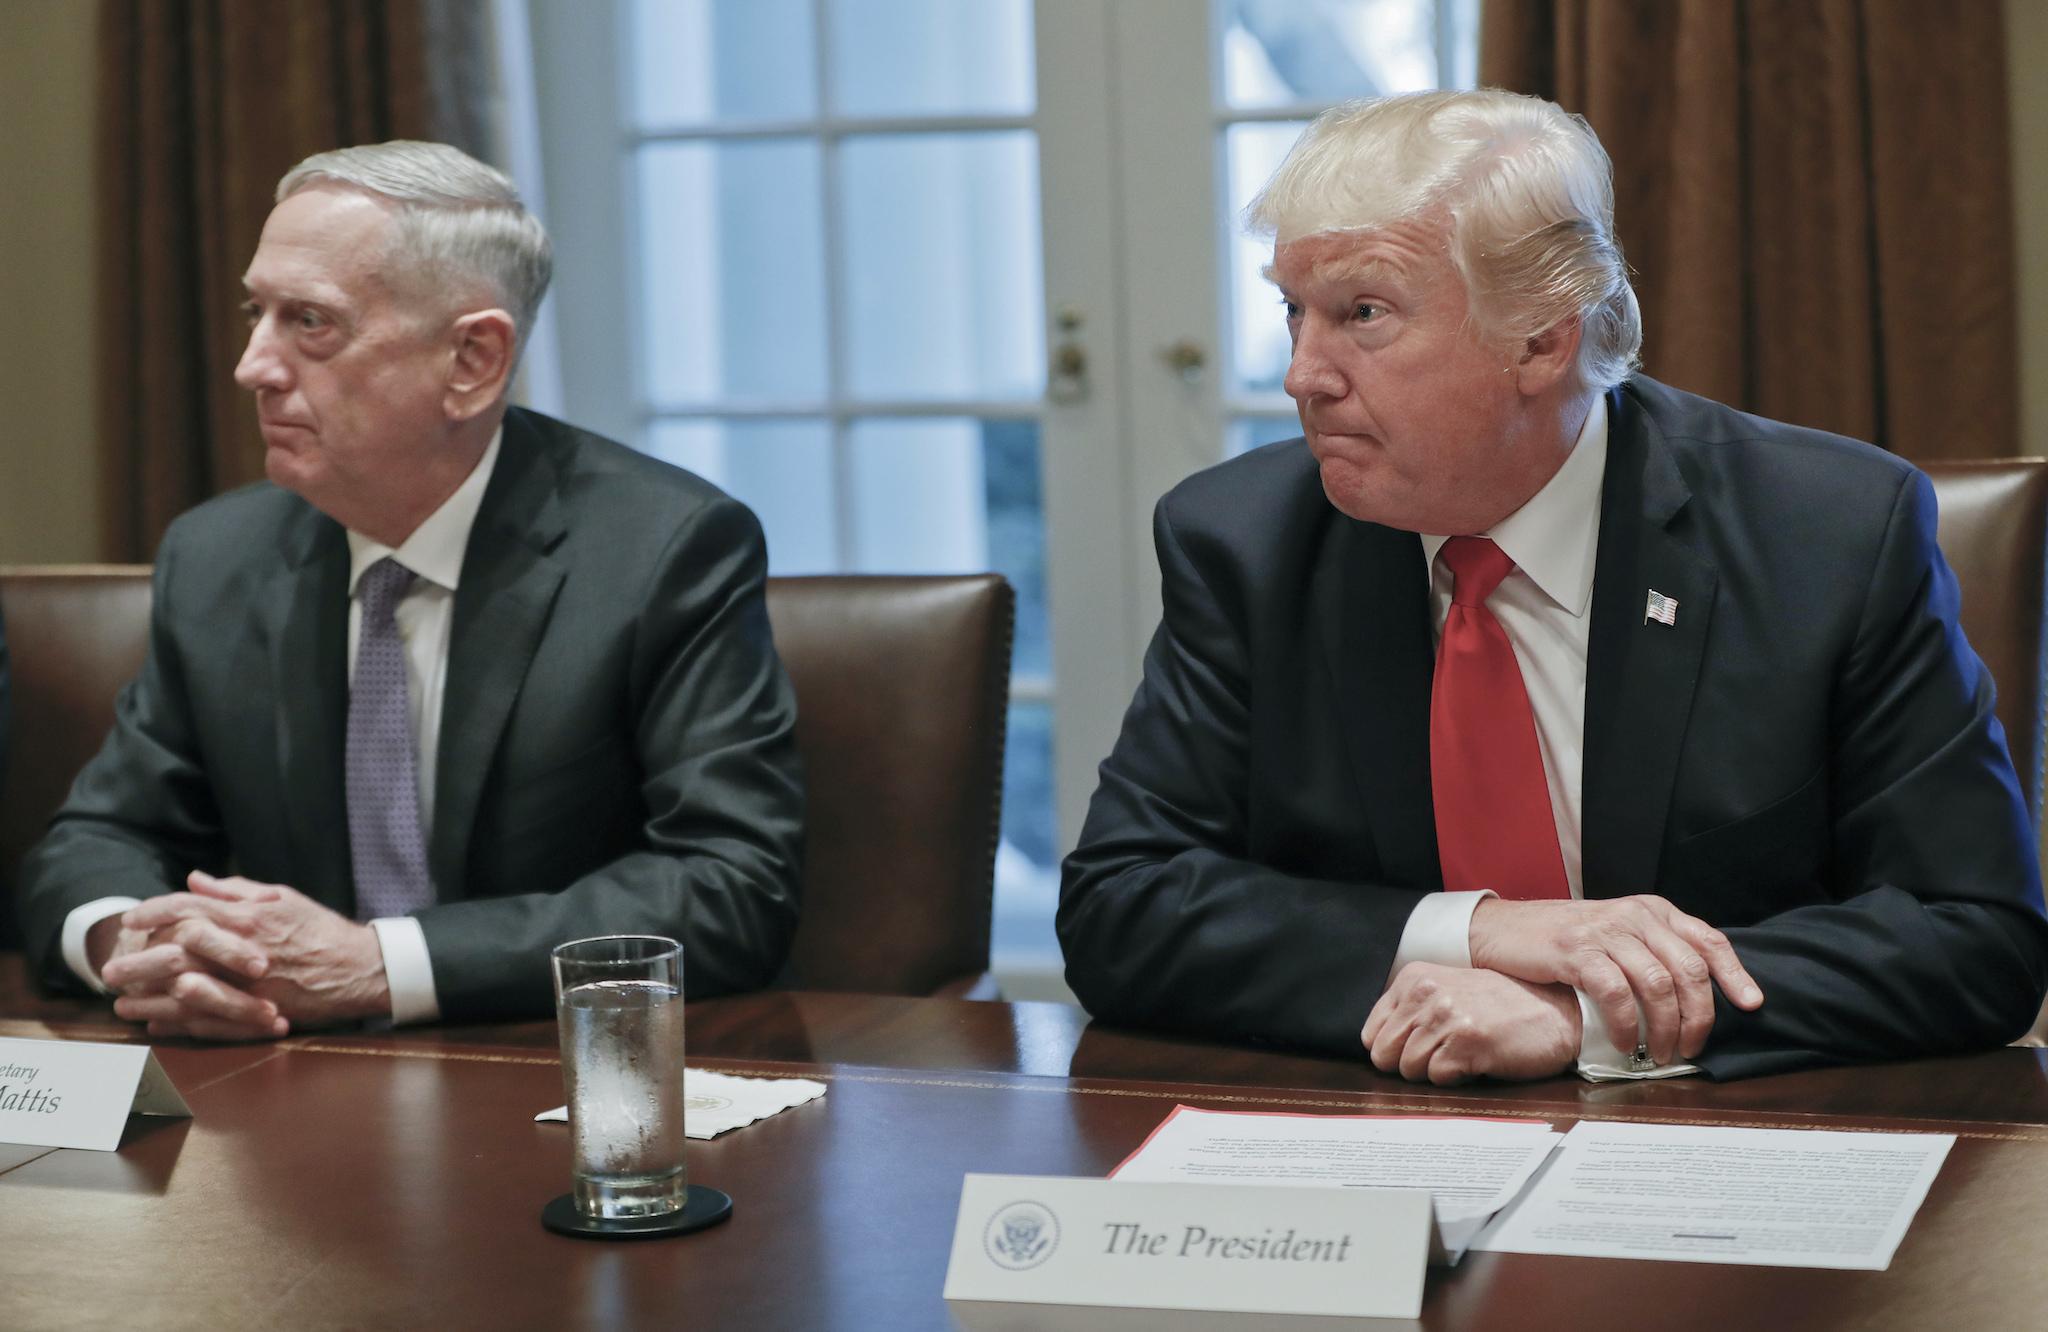 President Donald Trump during a briefing with Senior Military leaders. Sitting on the left is Defence Secretary James Mattis.